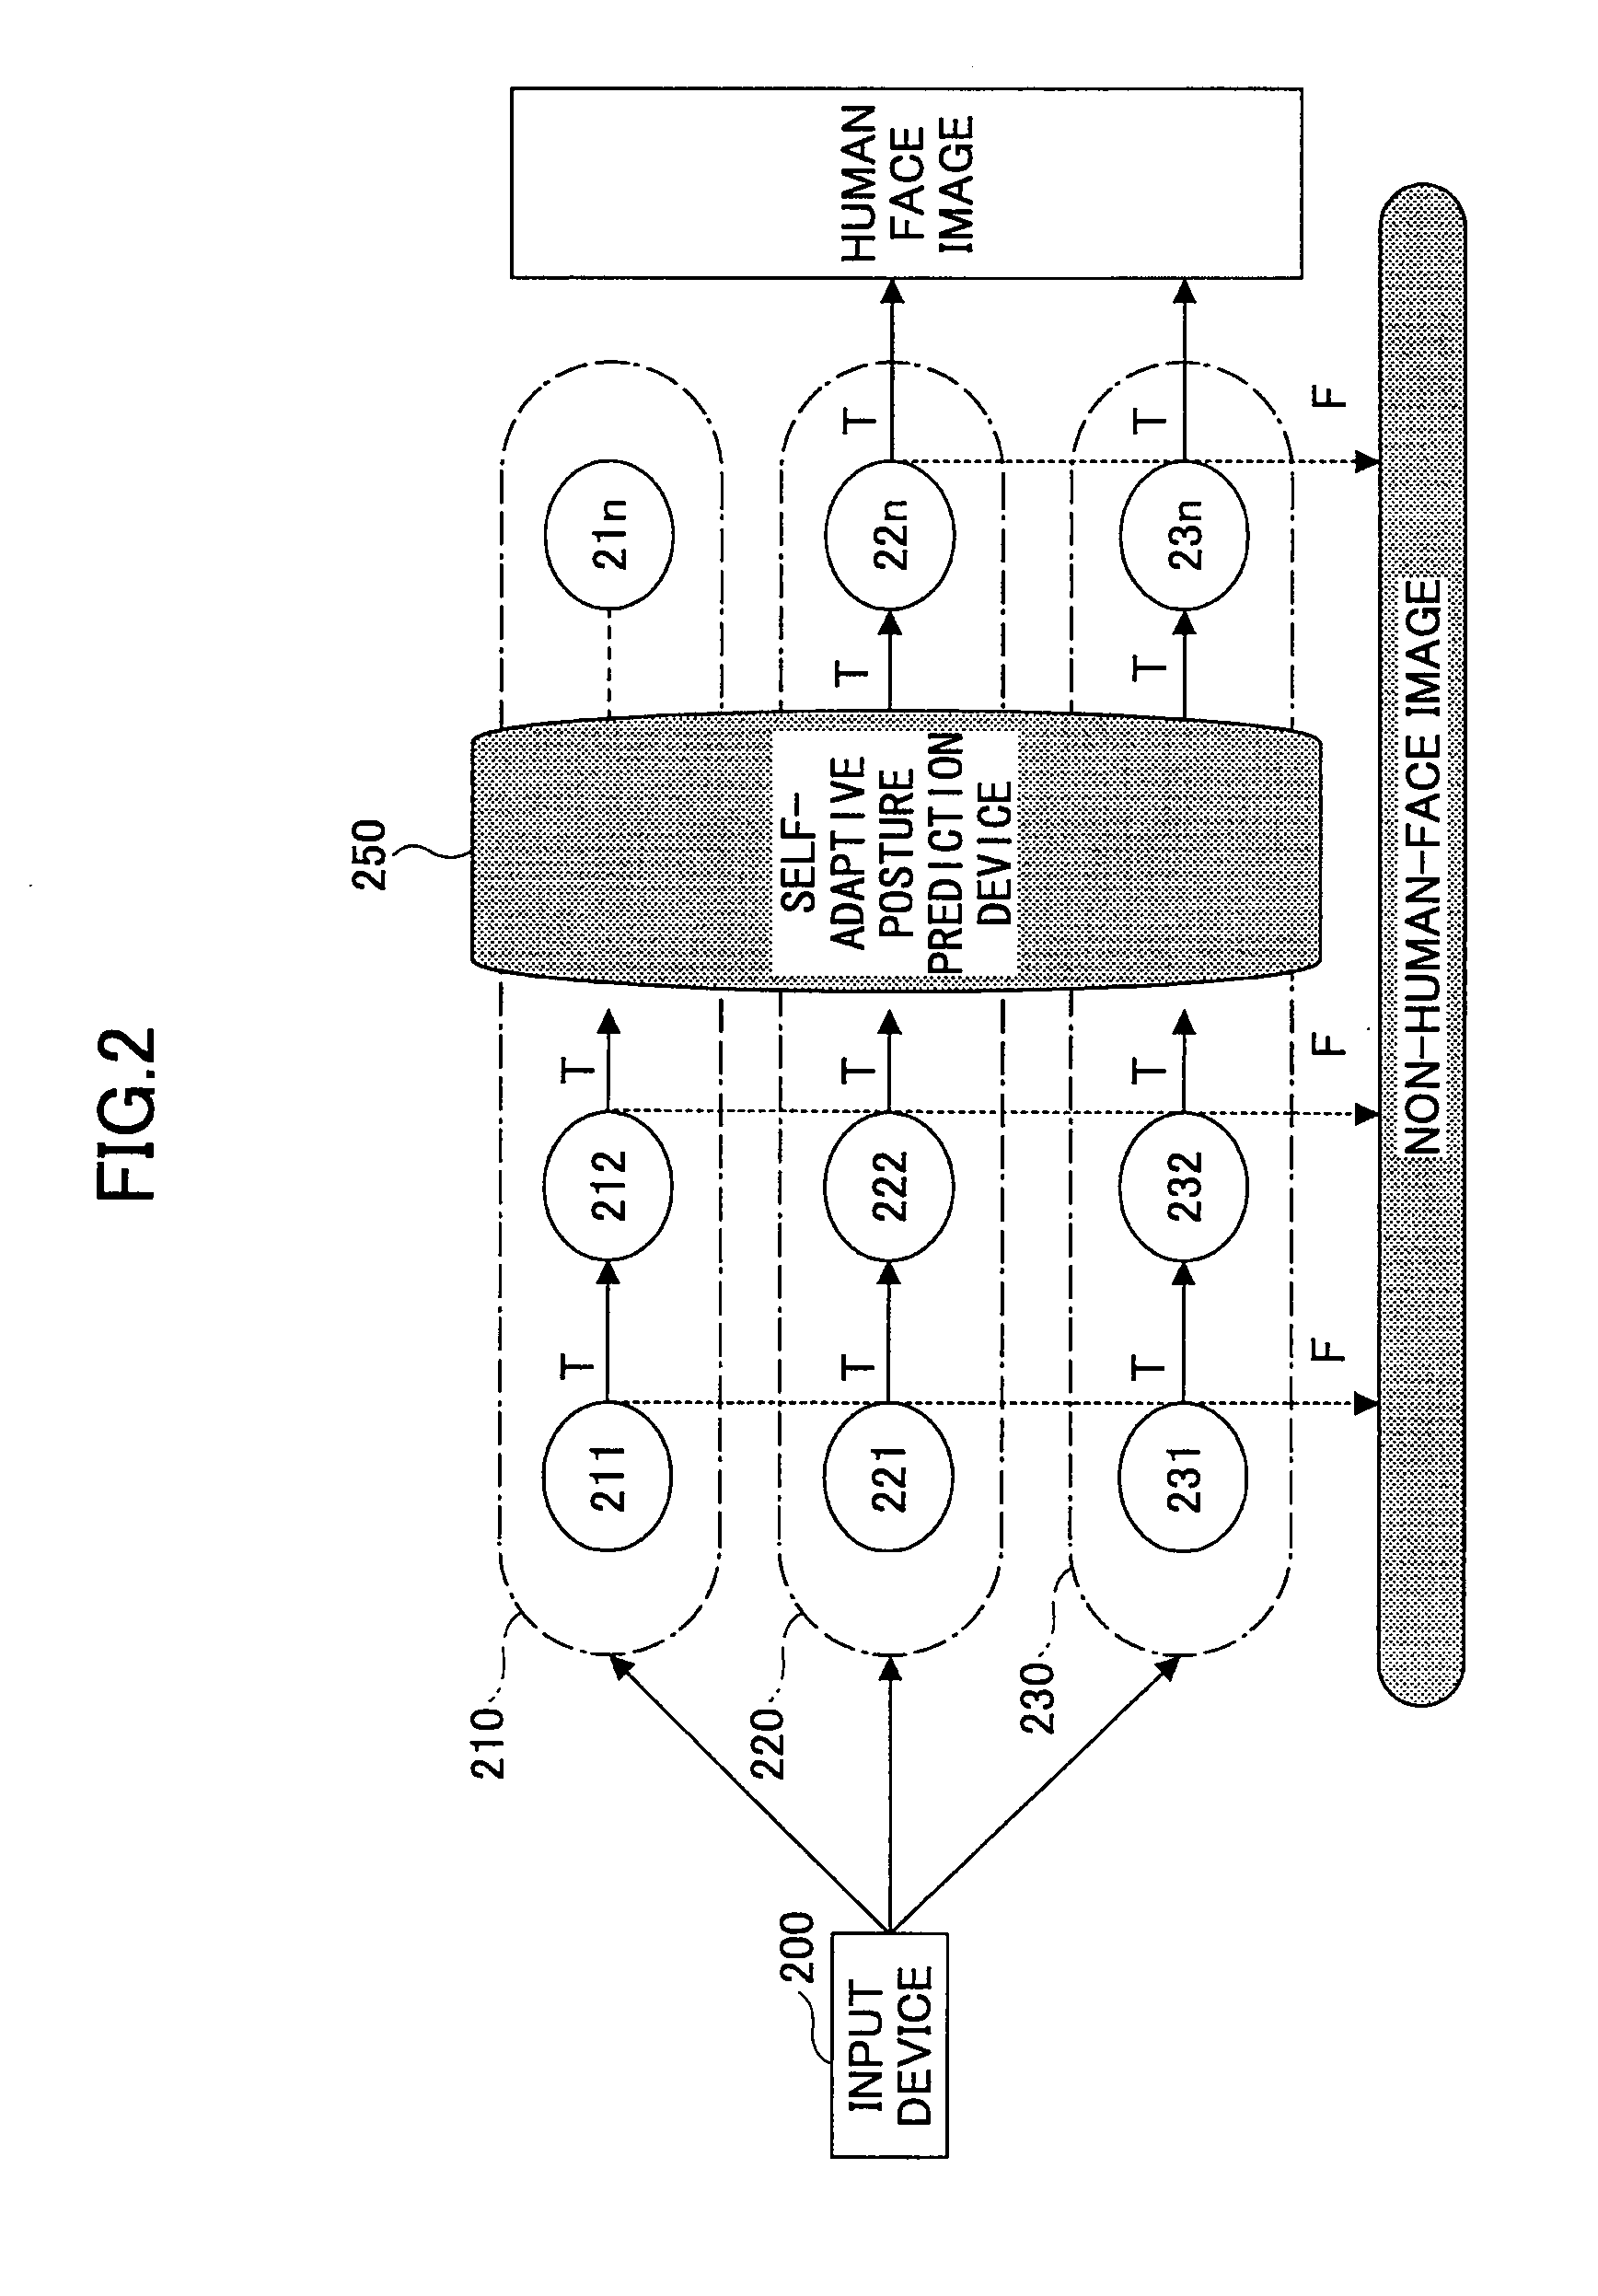 Apparatus and method for detecting multi-view specific object